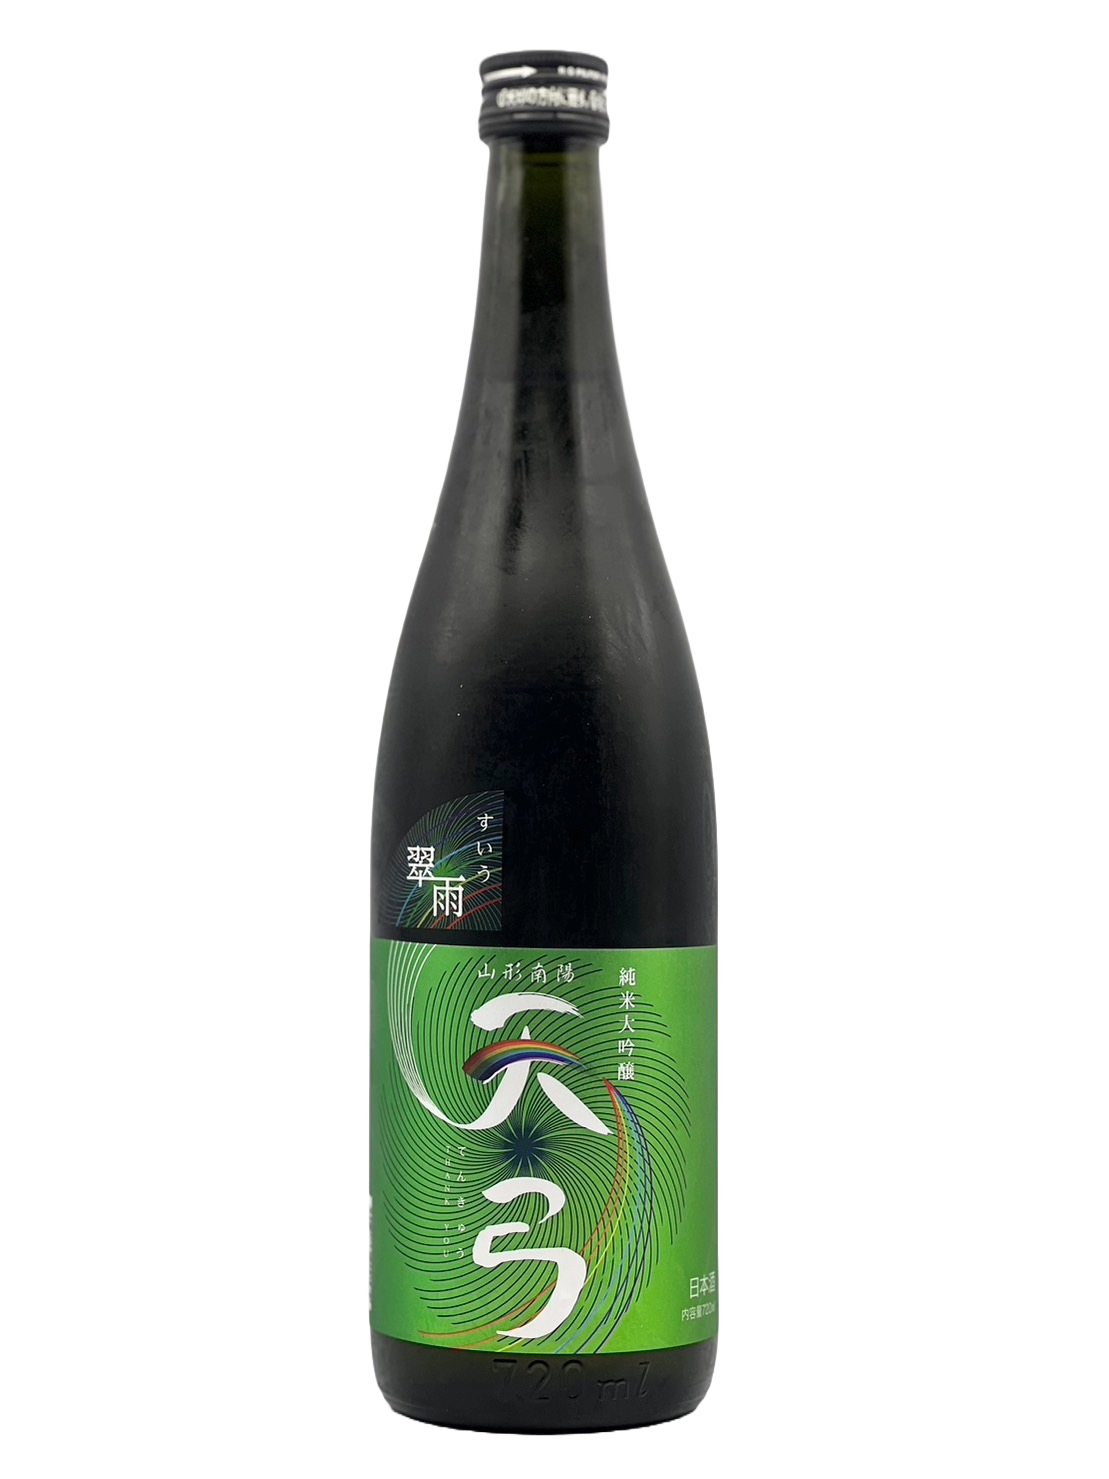 Heavenly bow green rain pure rice size brewing sake from the finest rice 